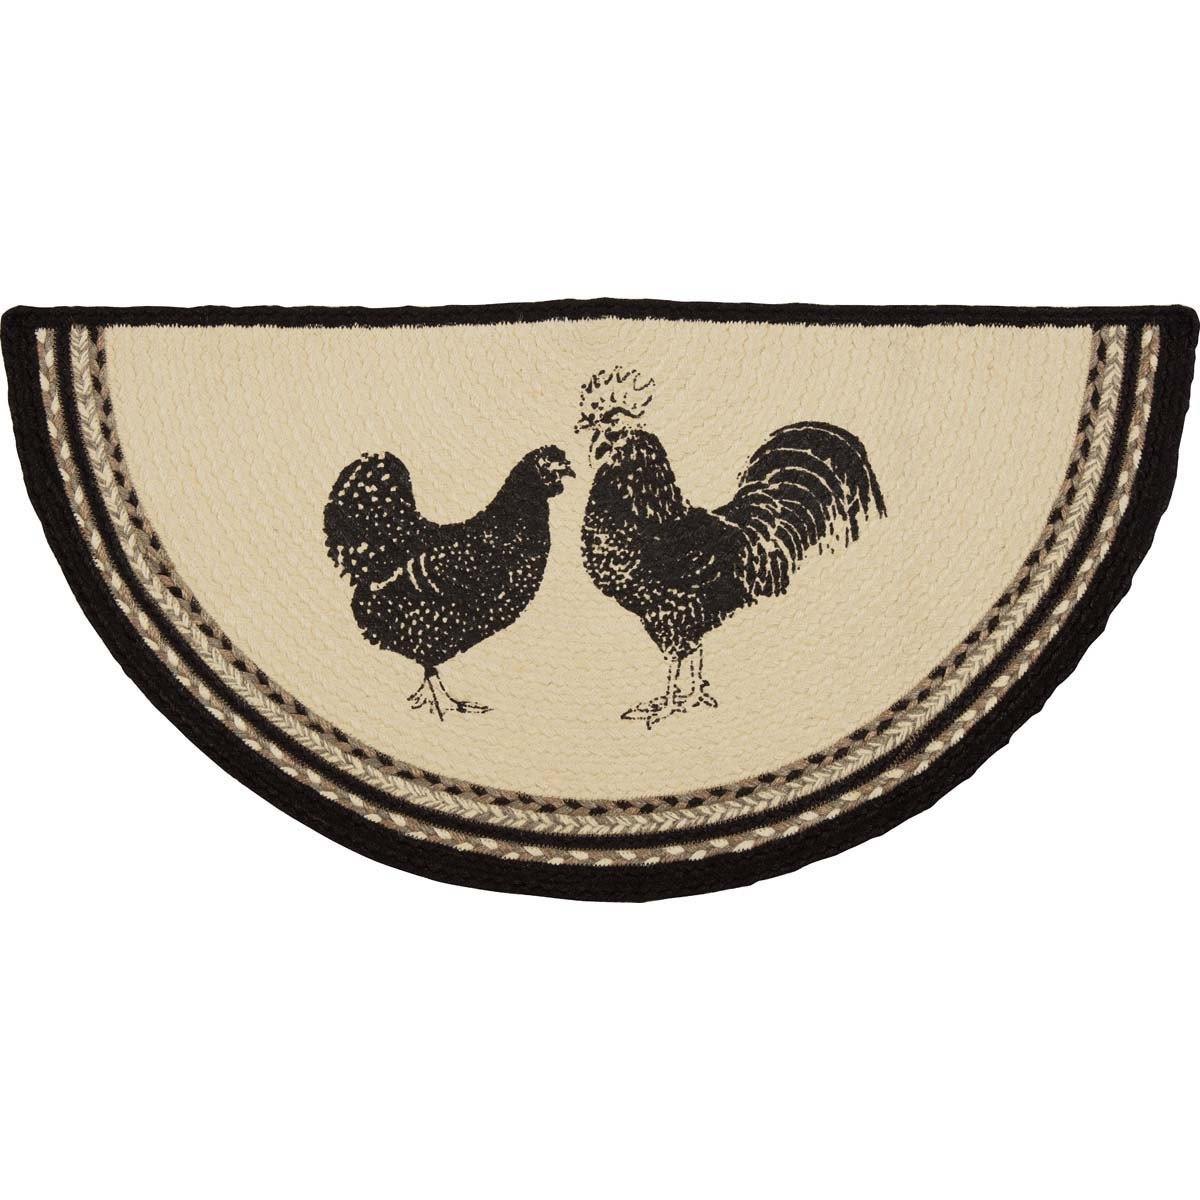 Sawyer Mill Charcoal Poultry Jute Braided Rug Half Circle 16.5"x33" VHC Brands - The Fox Decor